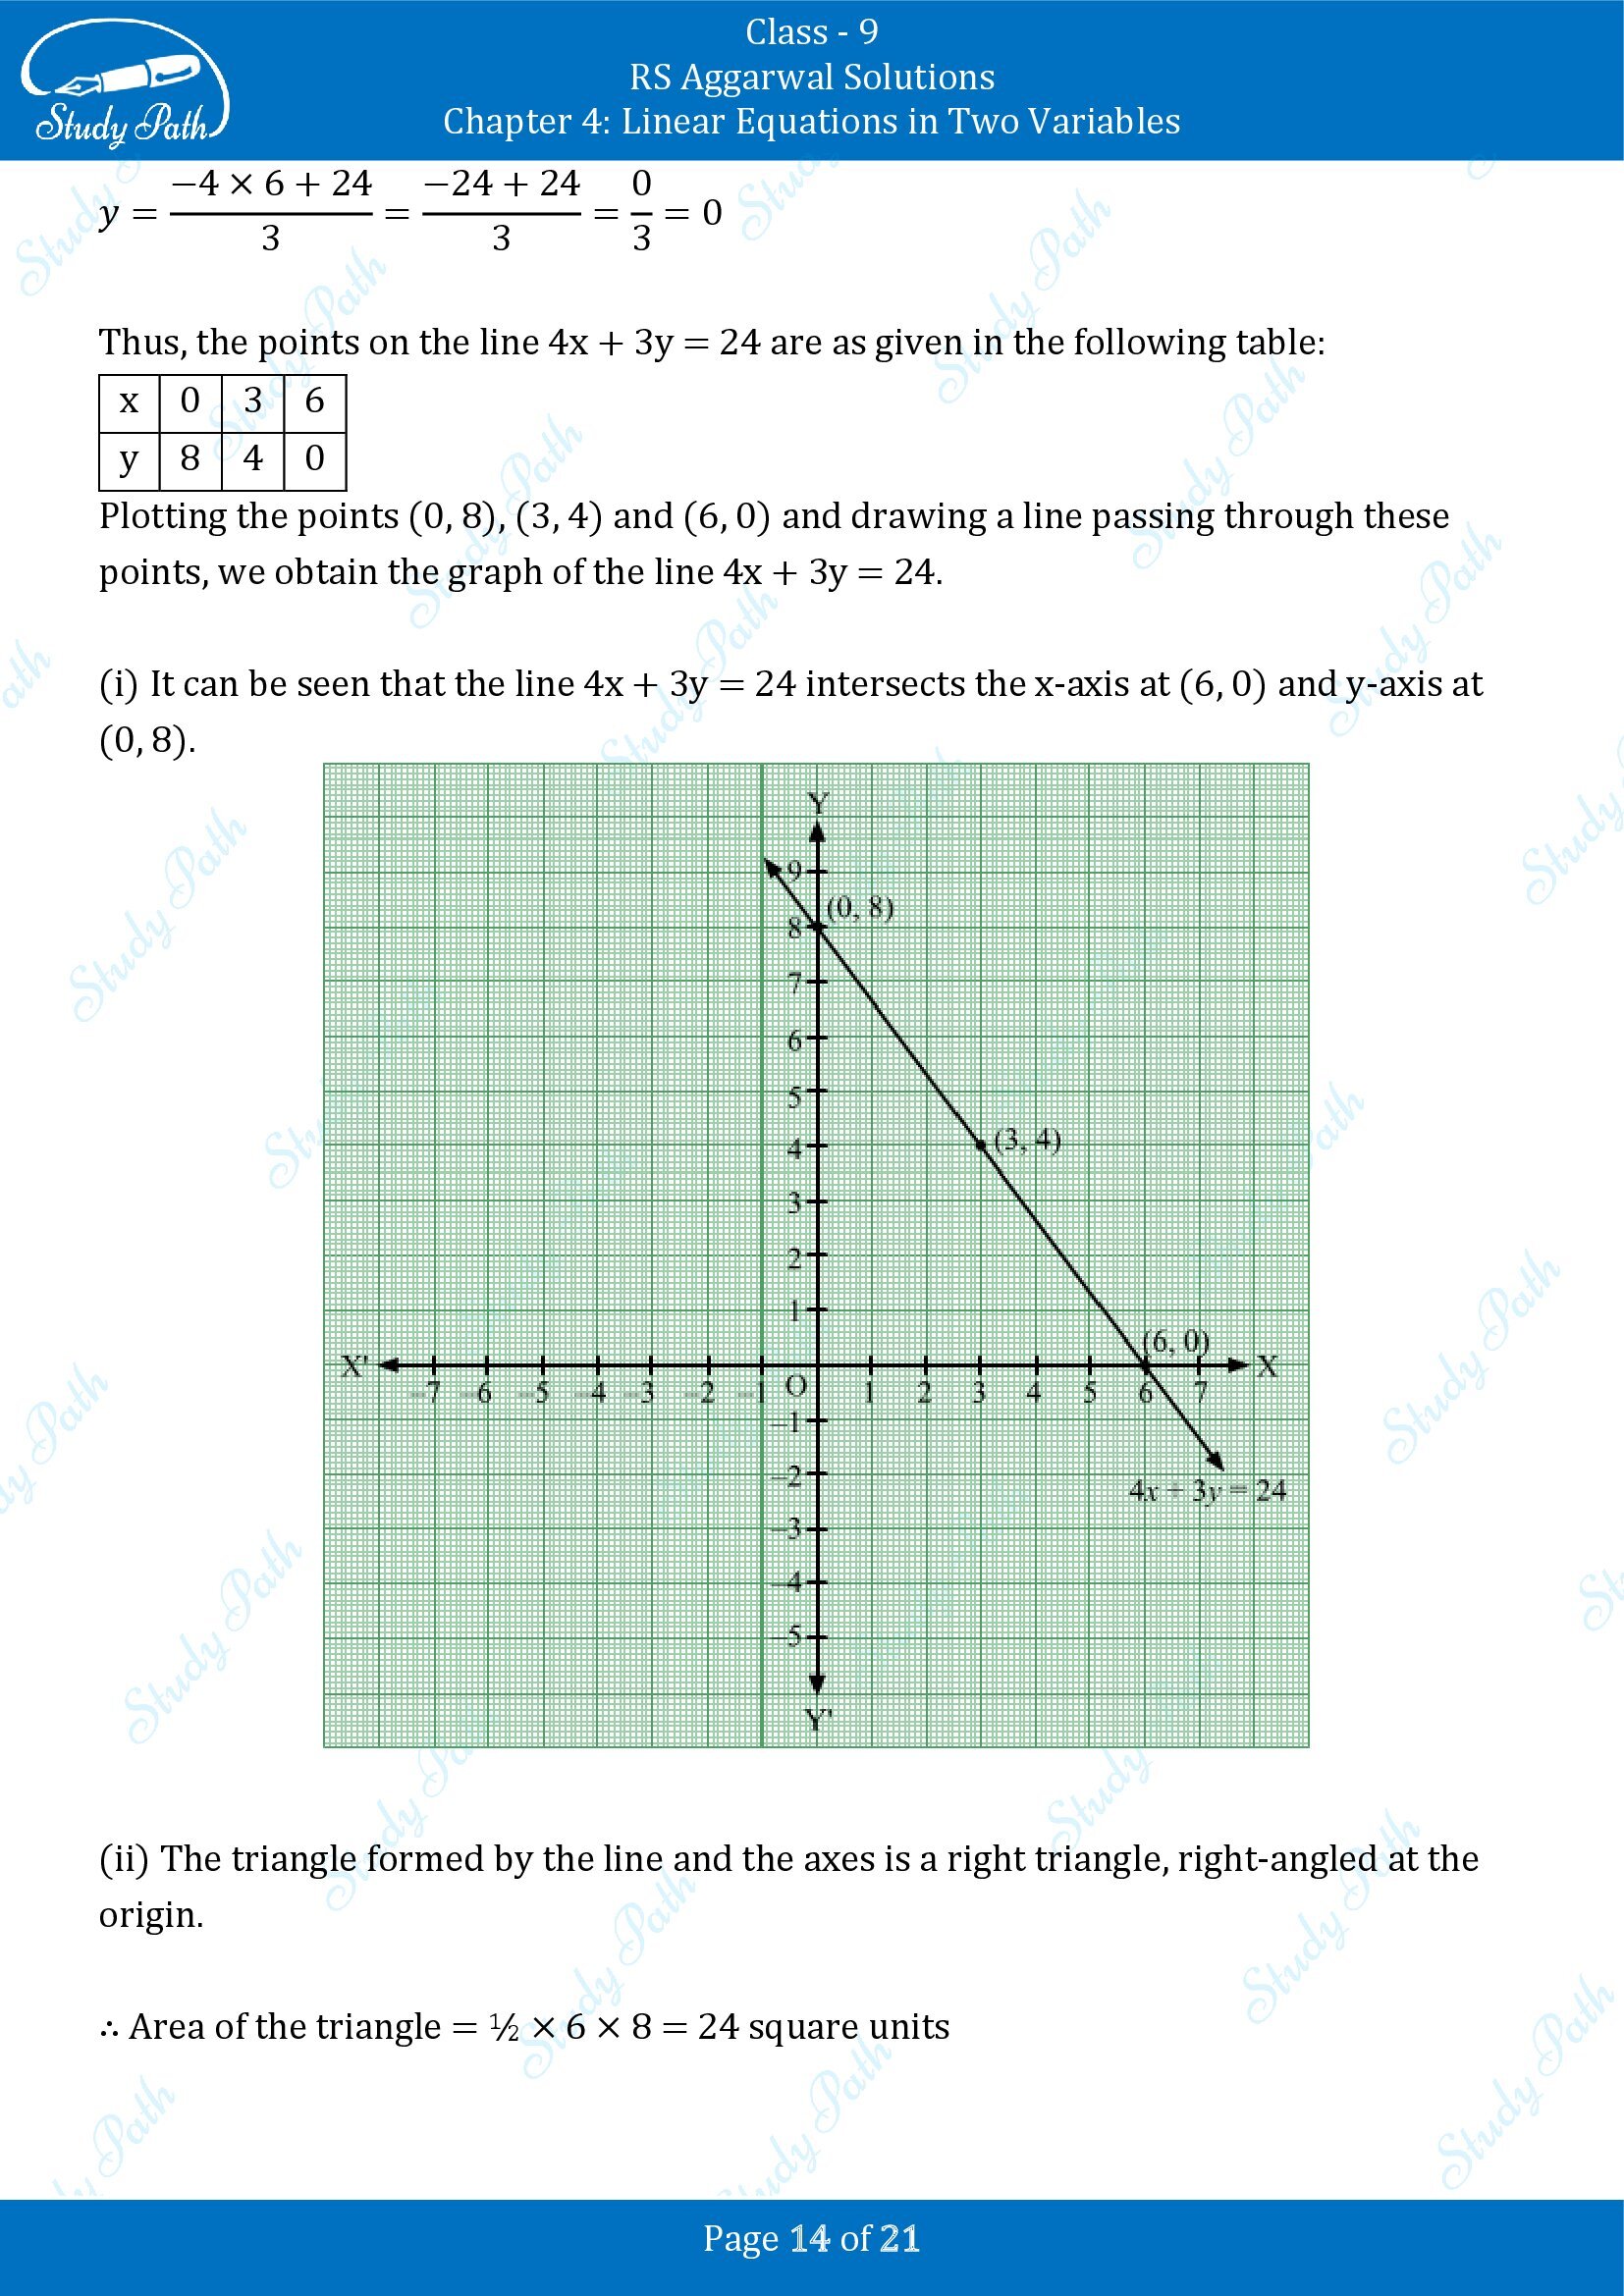 RS Aggarwal Solutions Class 9 Chapter 4 Linear Equations in Two Variables Exercise 4B 00014